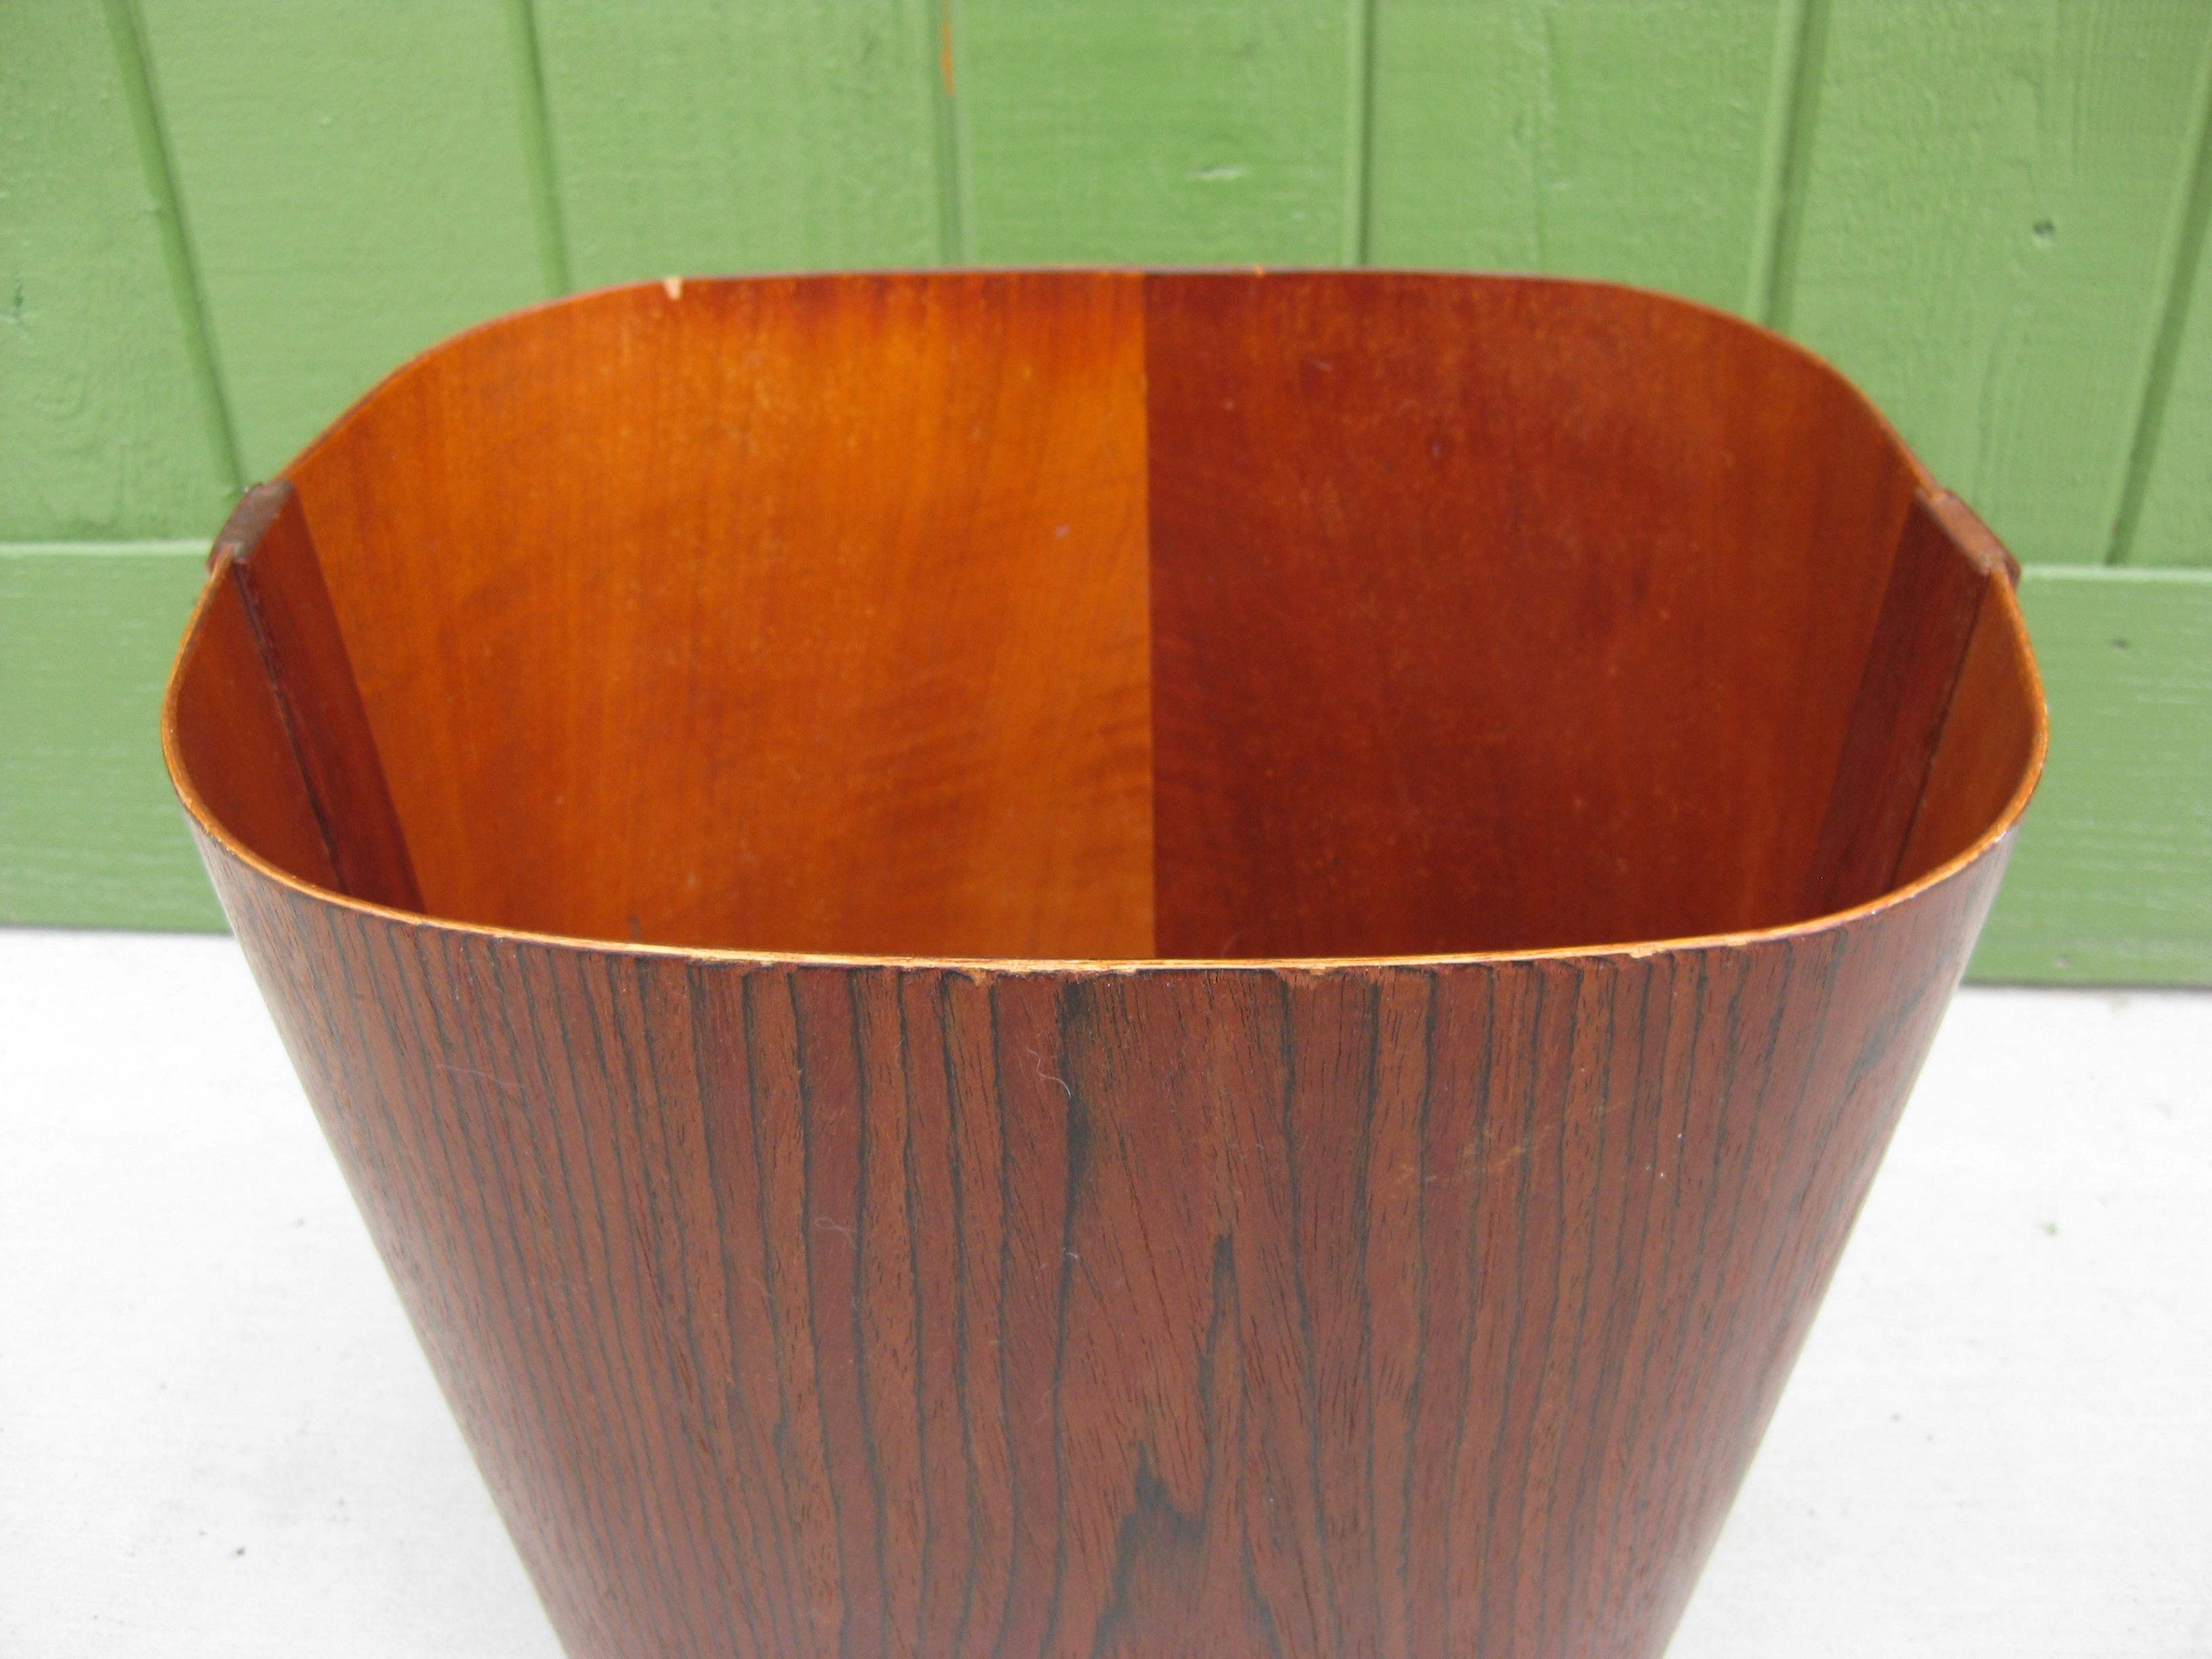 Beautiful rosewood waste basket/trash can made by Beni Mobler and dates from the 1960's. Made in Denmark and is marked on the bottom. Wonderful form and design. The trashcan is made of bent wood with a rosewood veneer. In nice original condition.